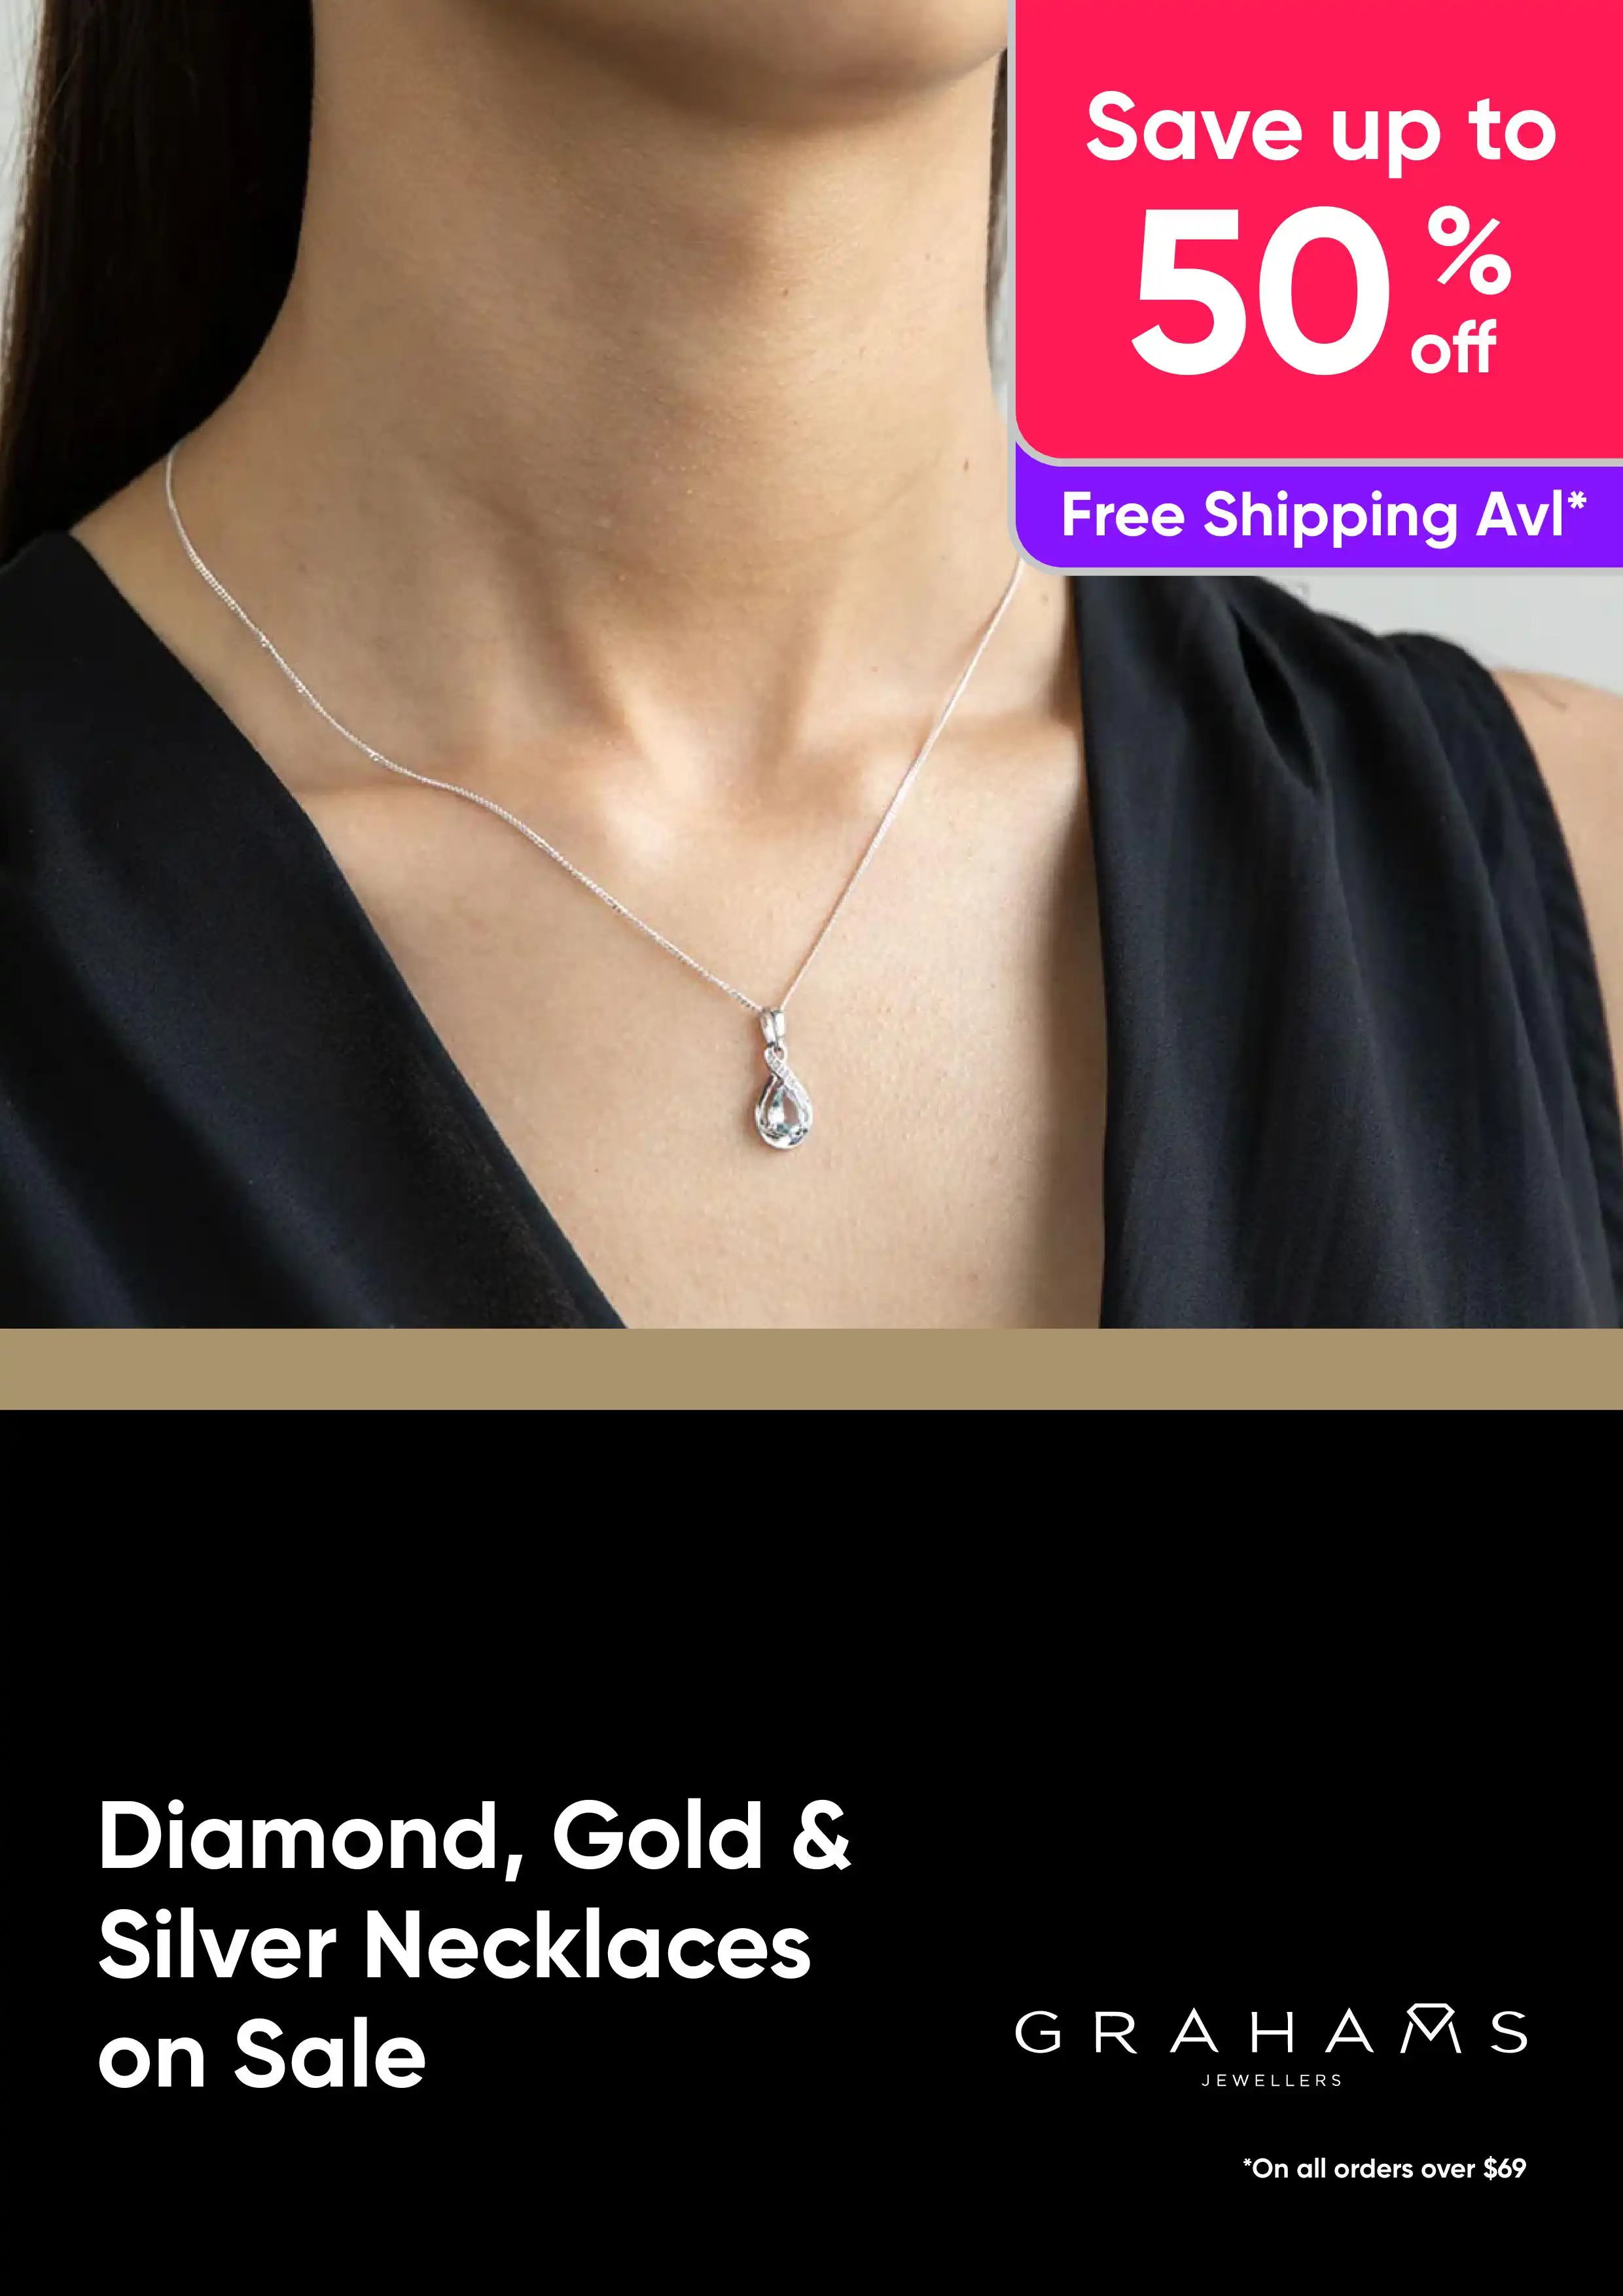 Diamond, Gold and Silver Necklaces on Sale - Save Up to 50% Off